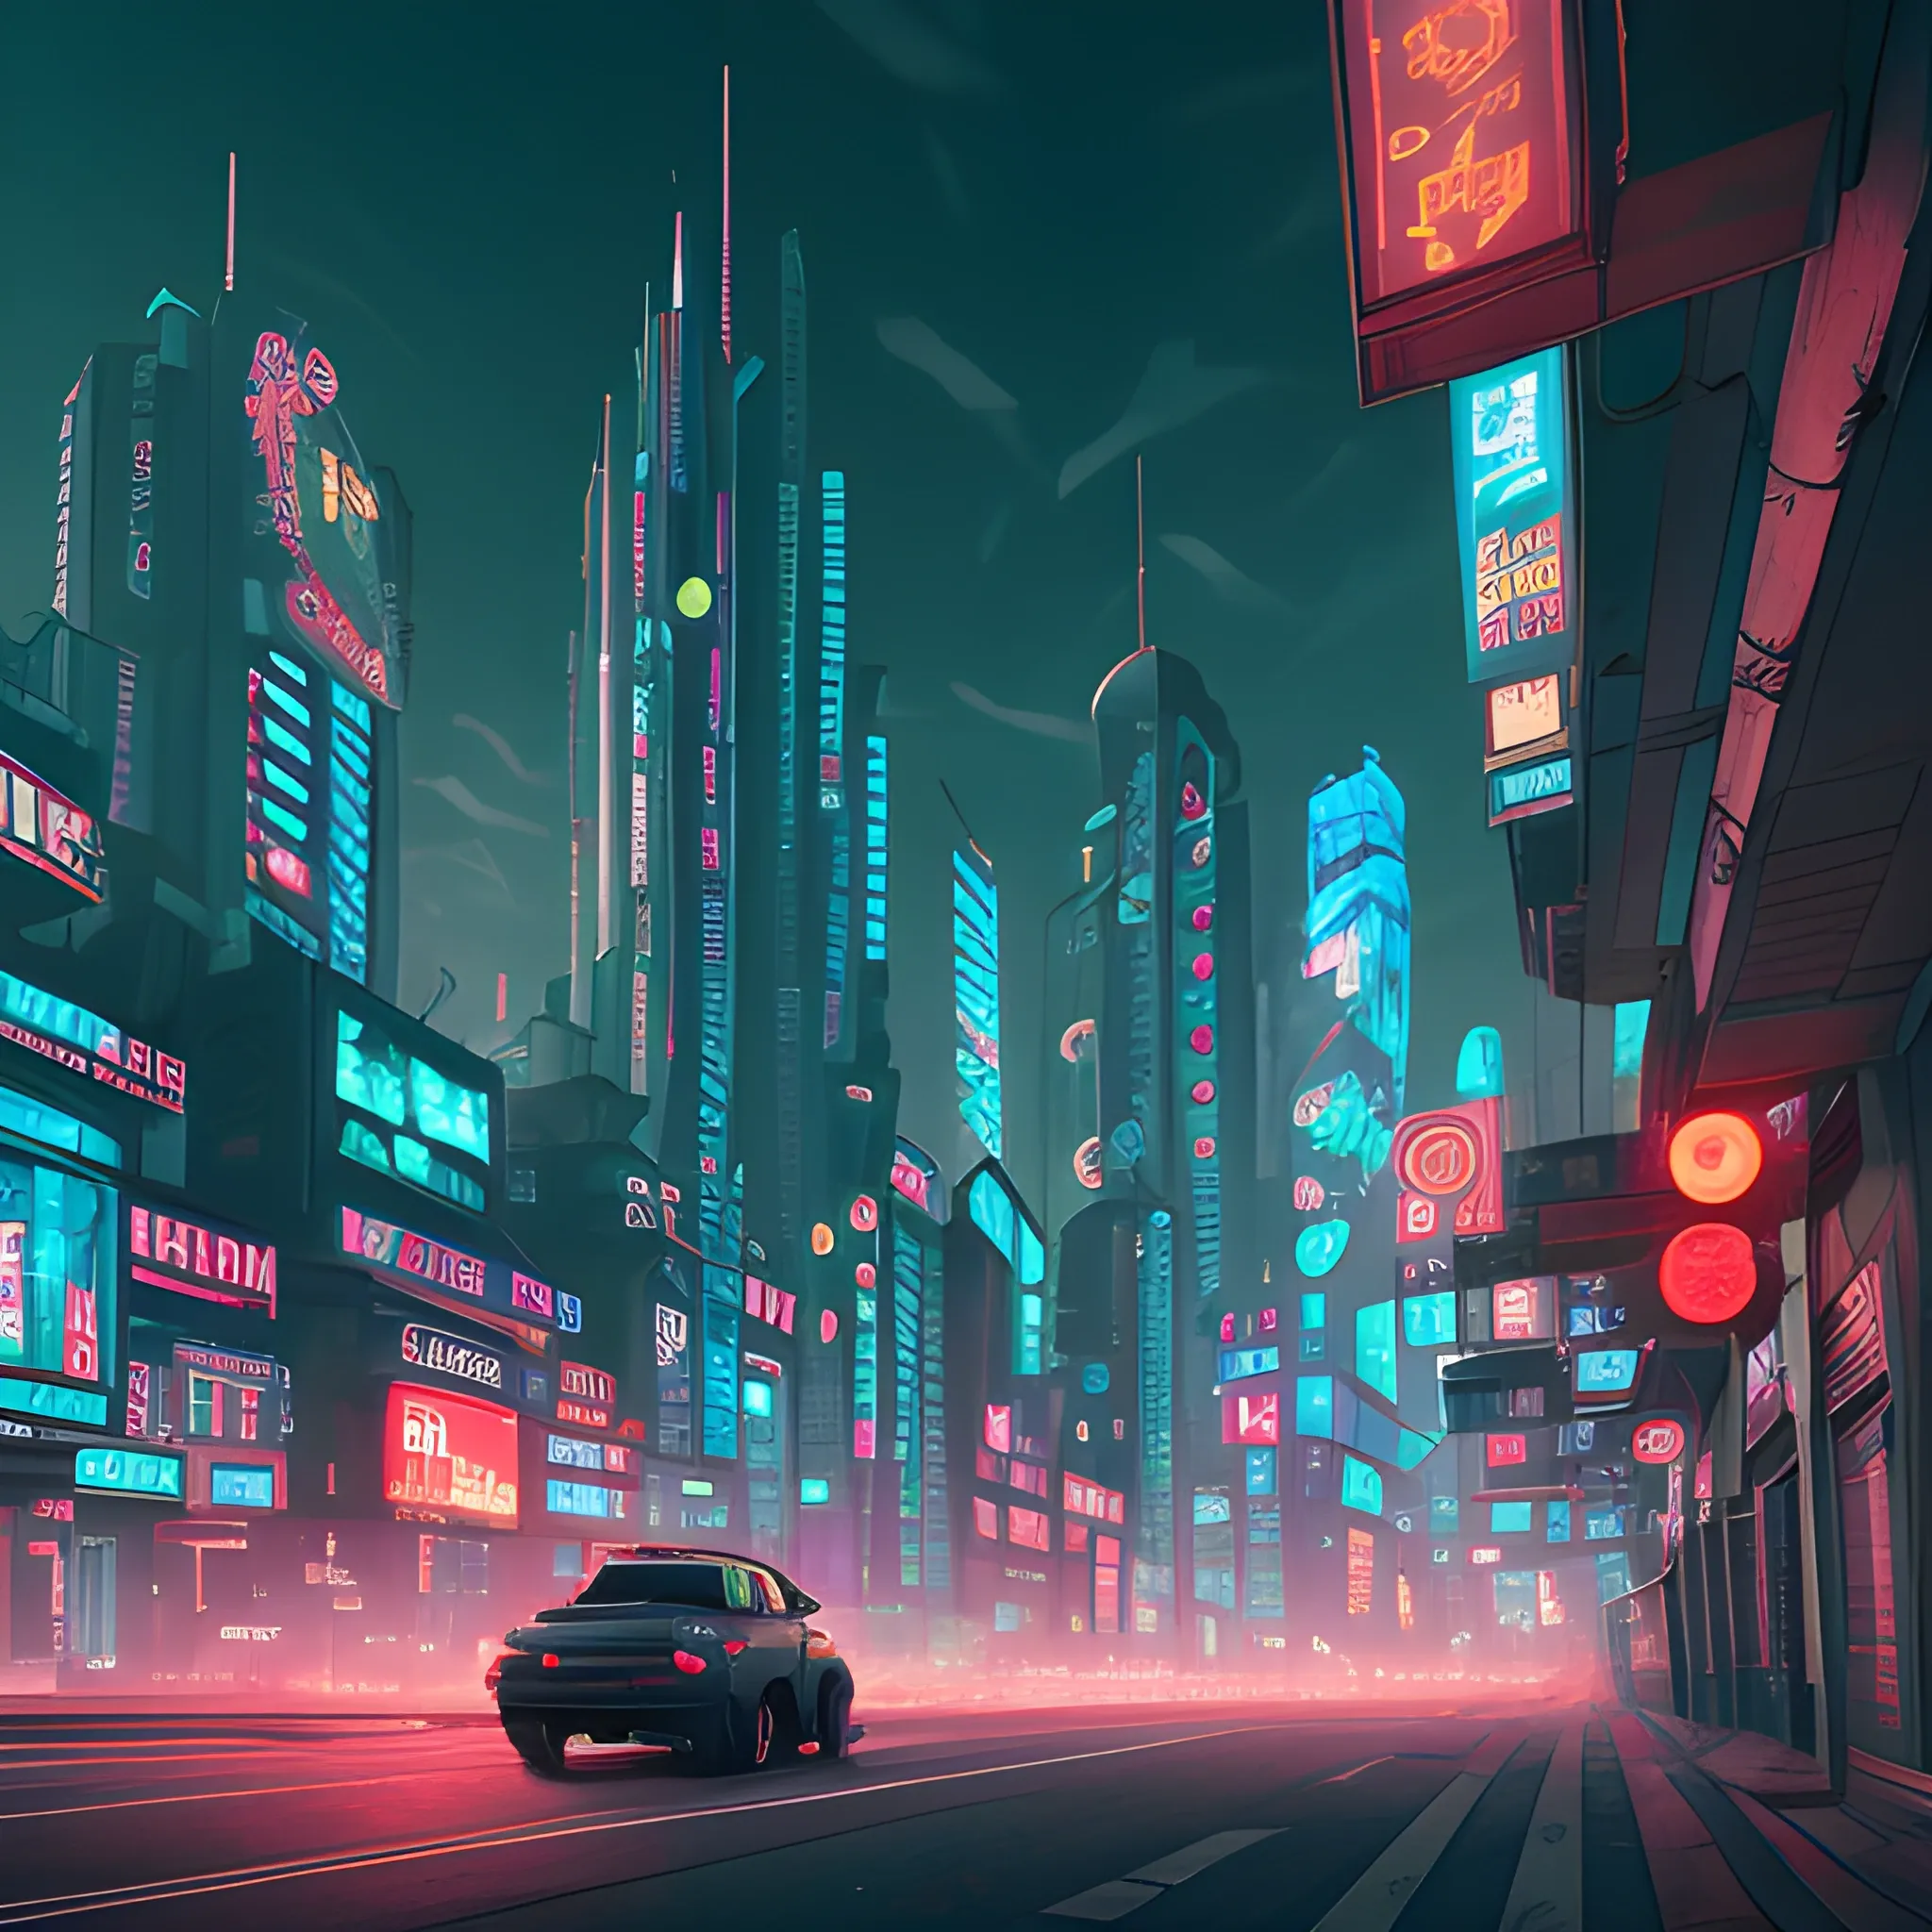 4k, beautiful, city, background of a cyberpunk  MAD DOG JONES, red color scheme (masterpiece, best illustration, no humans, no cars), vaporwave, pandemic city, side, blue, semi realistic, dreamscape, award winning masterpiece with incredible details, liminal space, highly detailed, cinematic ,rim lighting ,octane render, wvebg1, bganidusk

